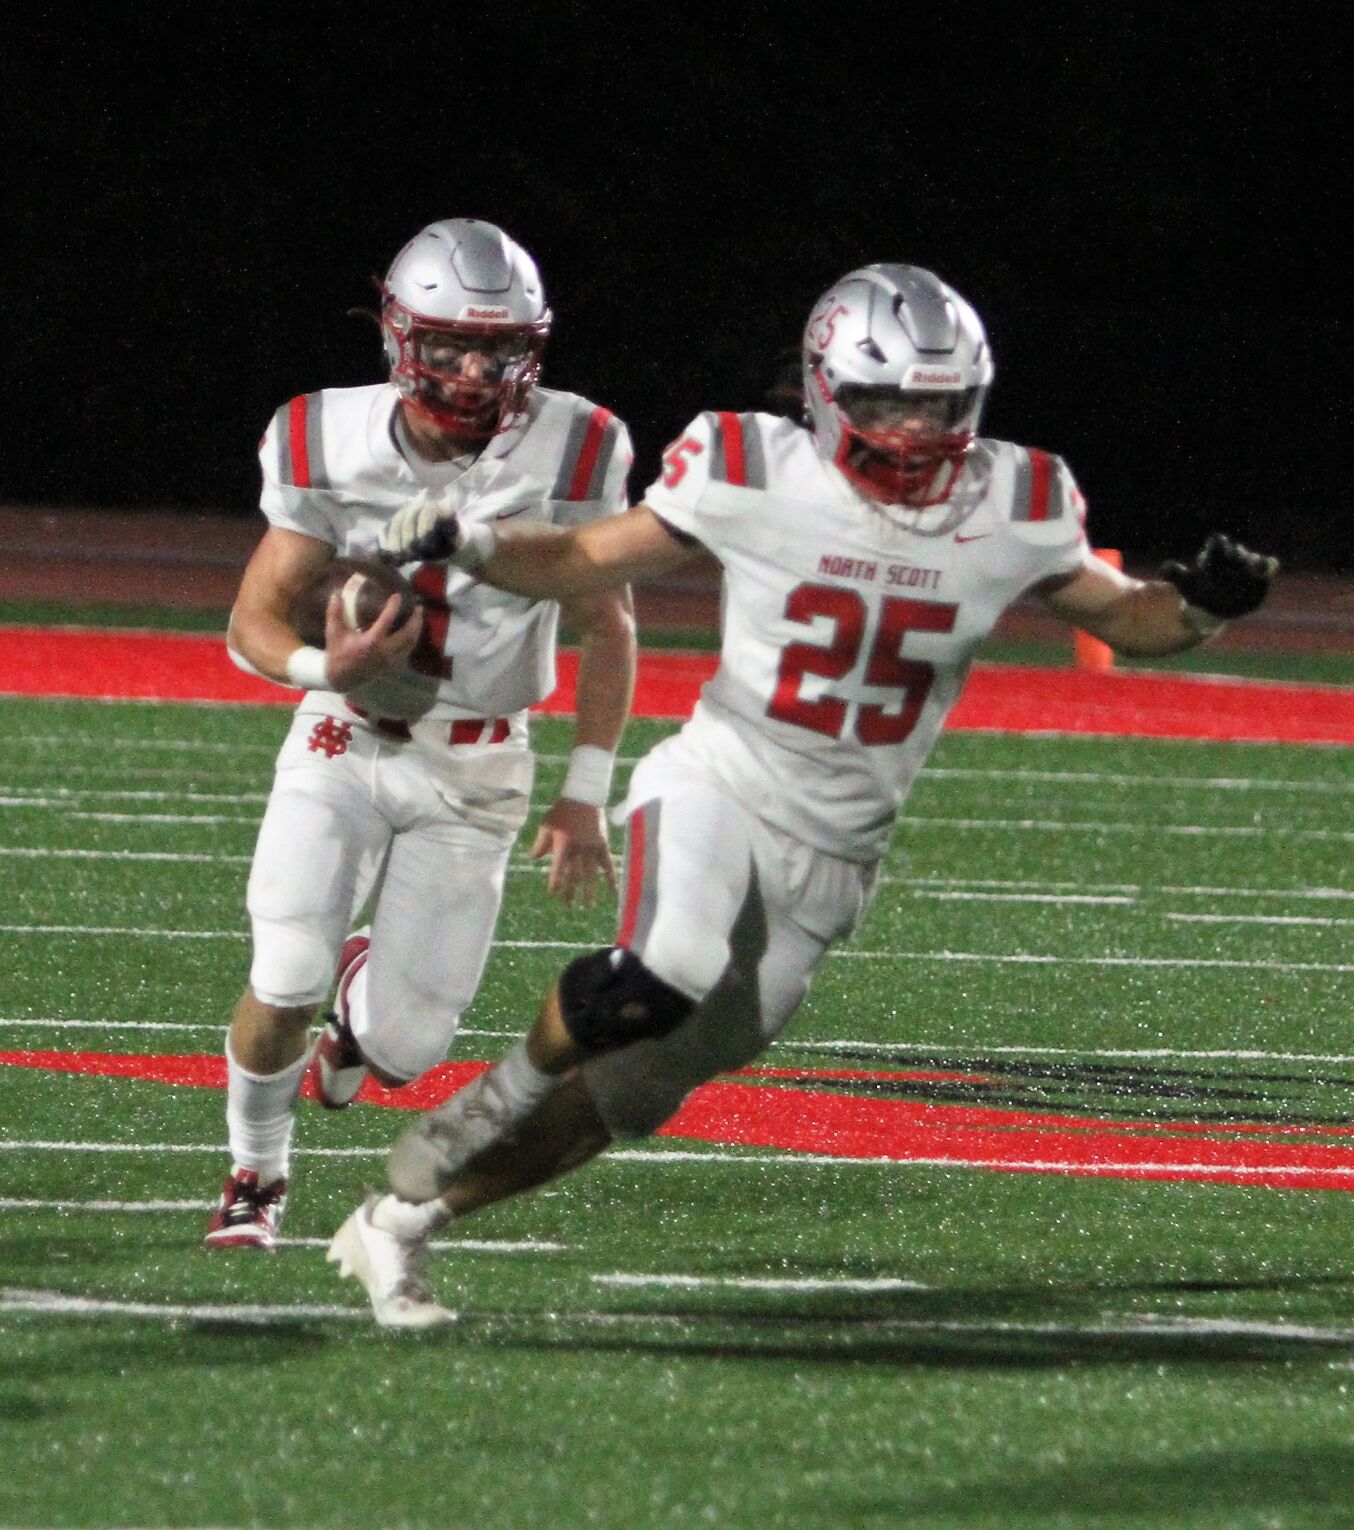 Grant Glausser’s Impressive Performance Leads Western Dubuque to Victory in Class 4A Semifinals